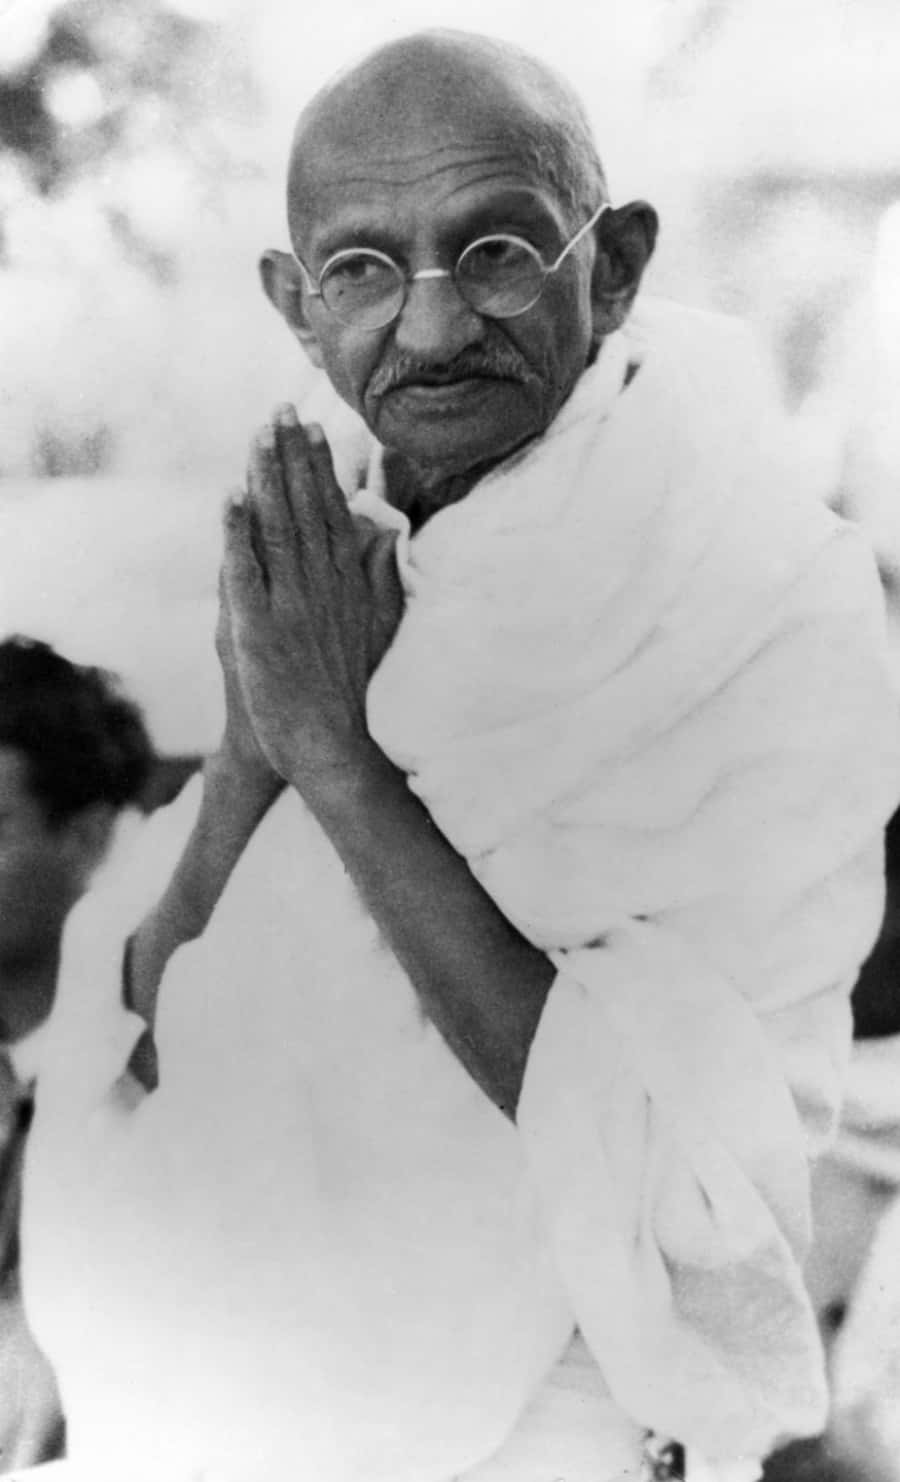 Mahatma Gandhi, the driving force behind India's independence